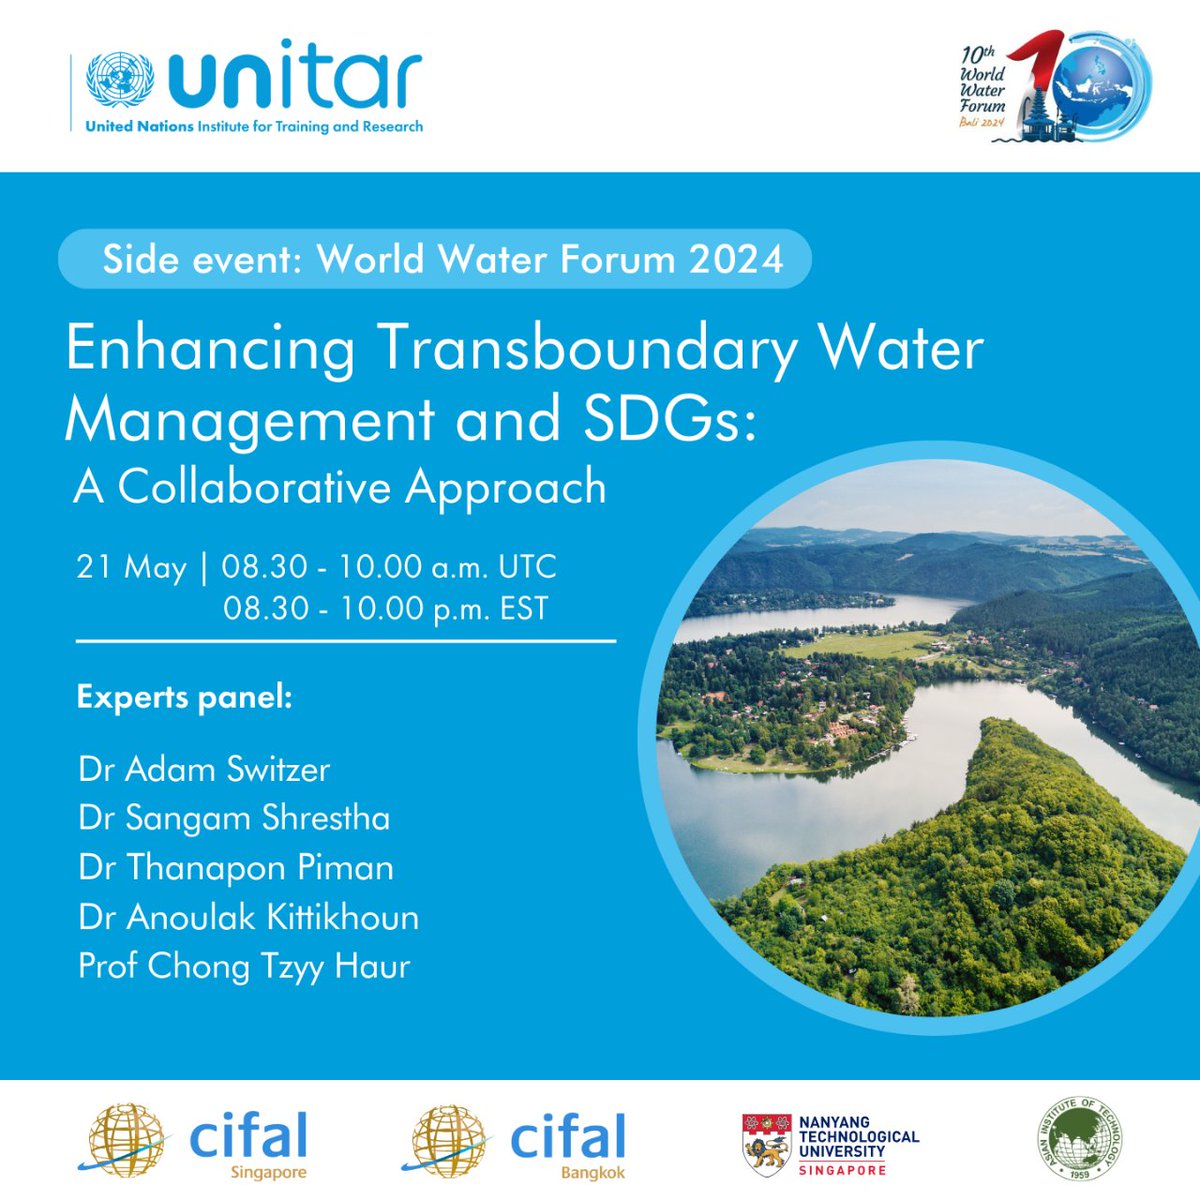 💧Join @UNITAR, CIFAL Singapore, and CIFAL Bangkok at the World Water Forum's 10th Anniversary in Bali for the side event entitled “Enhancing Transboundary Water Management and SDGs: A Collaborative Approach.” To register: rb.gy/x1yioj #Webinar #WaterManagement